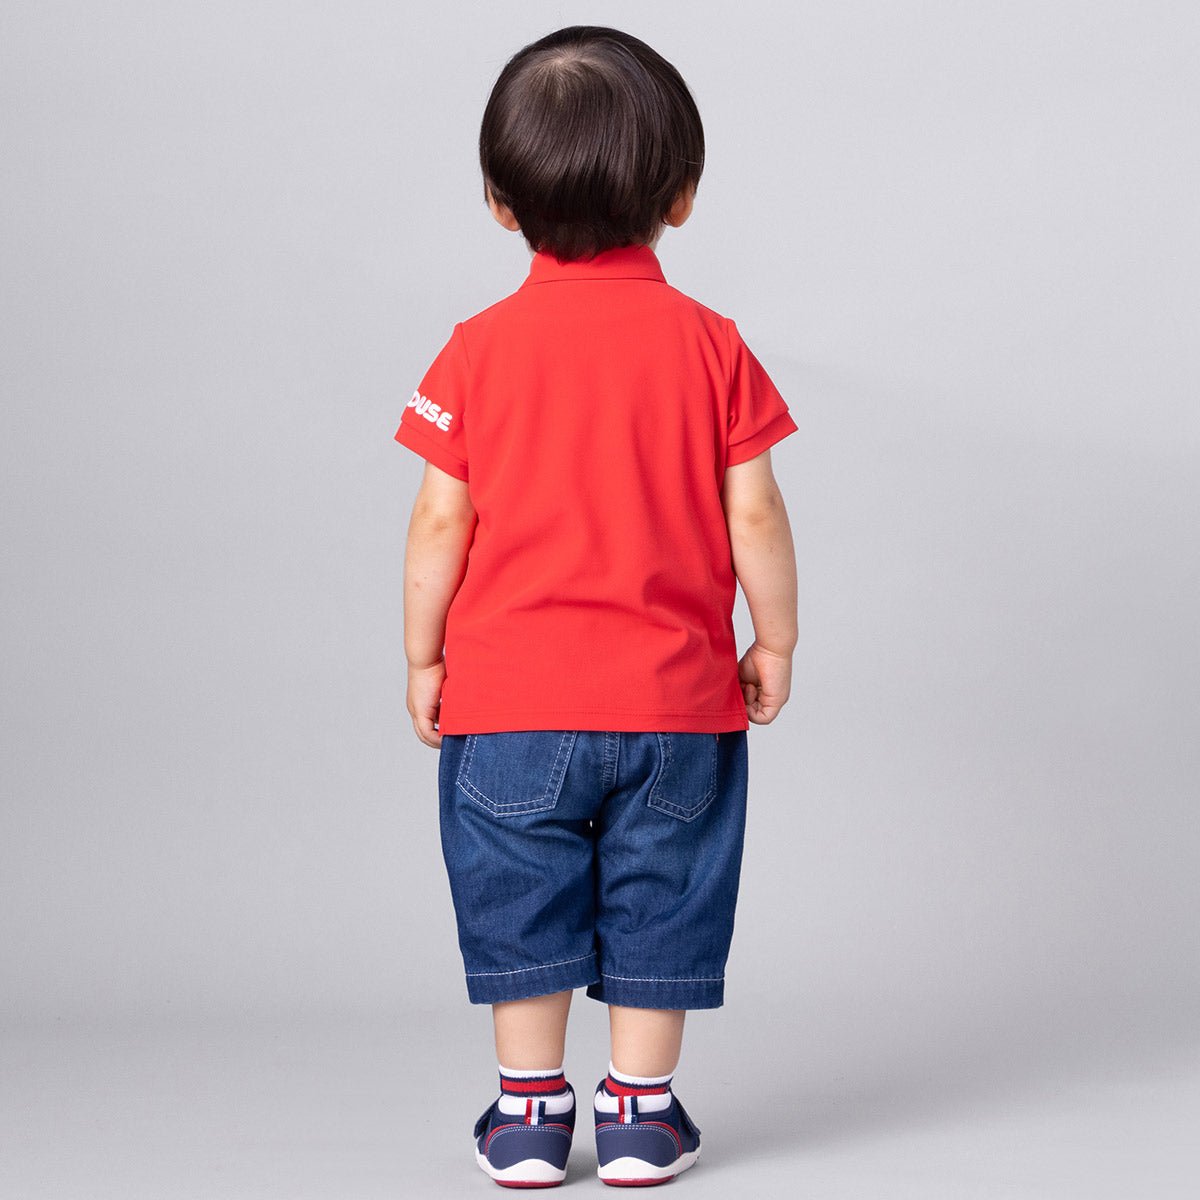 Half PantsMIKIHOUSE CANADA KIDS STORE ONLINE – MIKI HOUSE CANADA